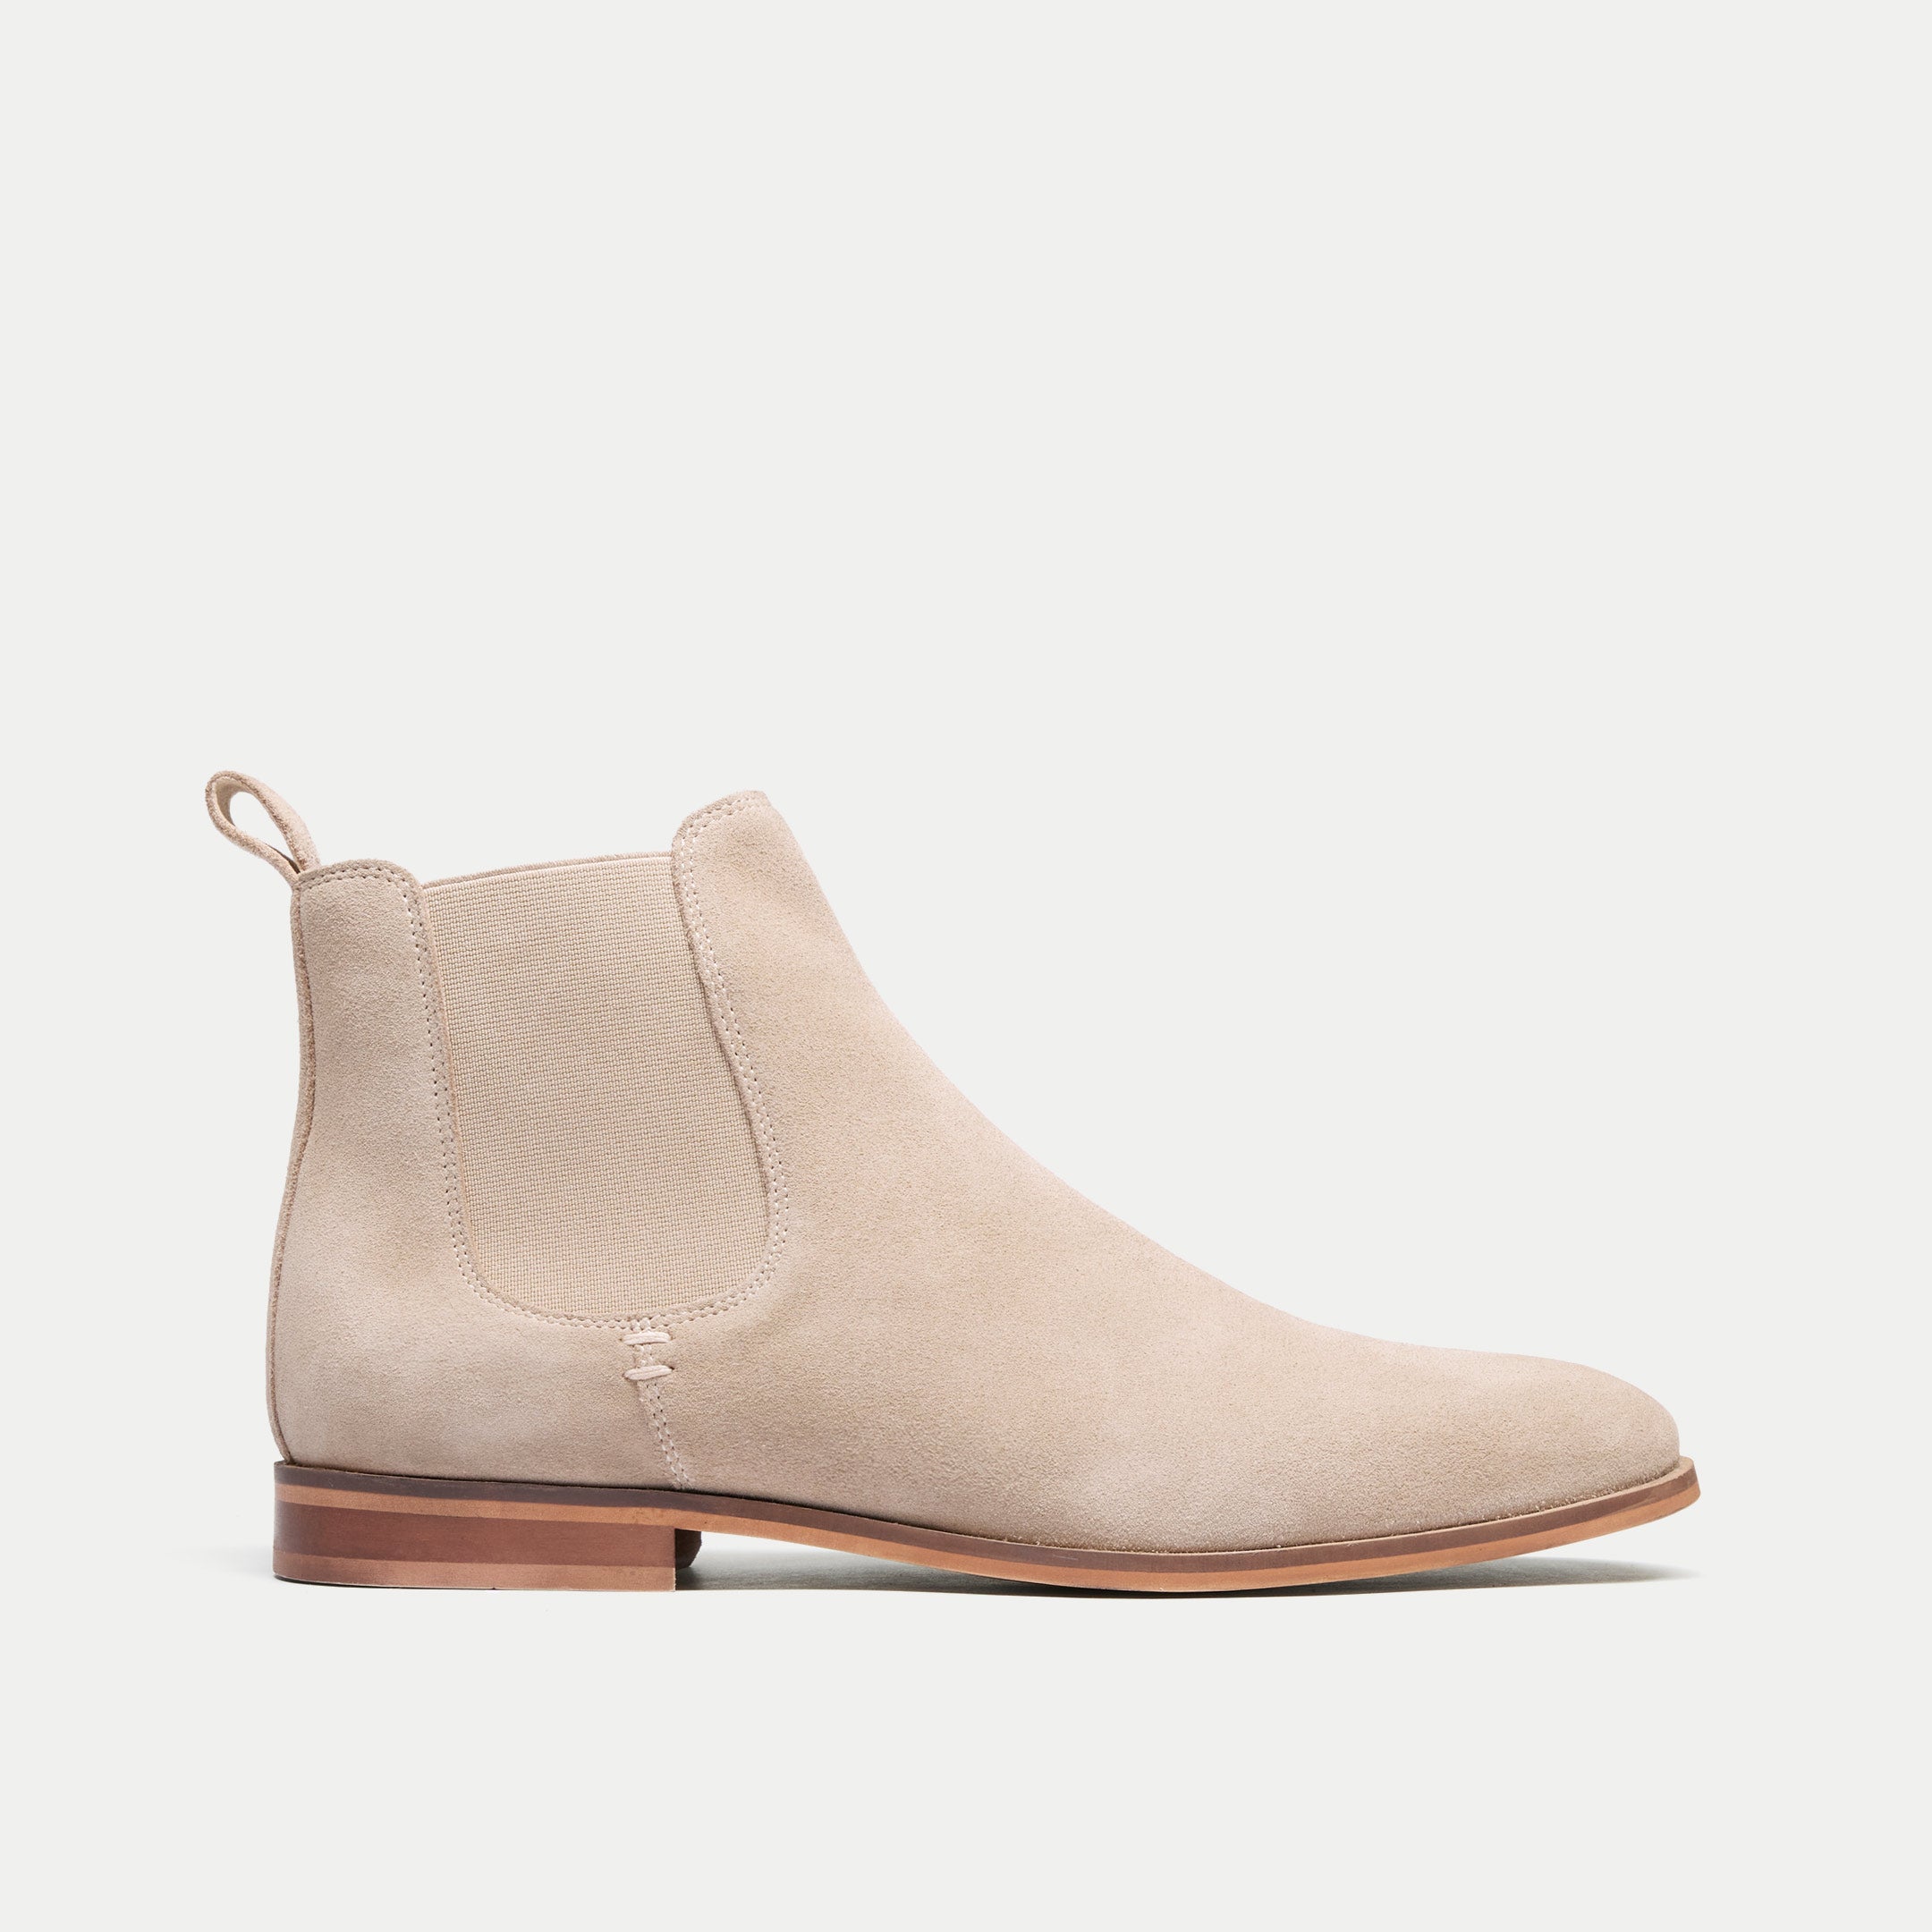 Walk London Mens Florence Chelsea Boot in Stone Suede